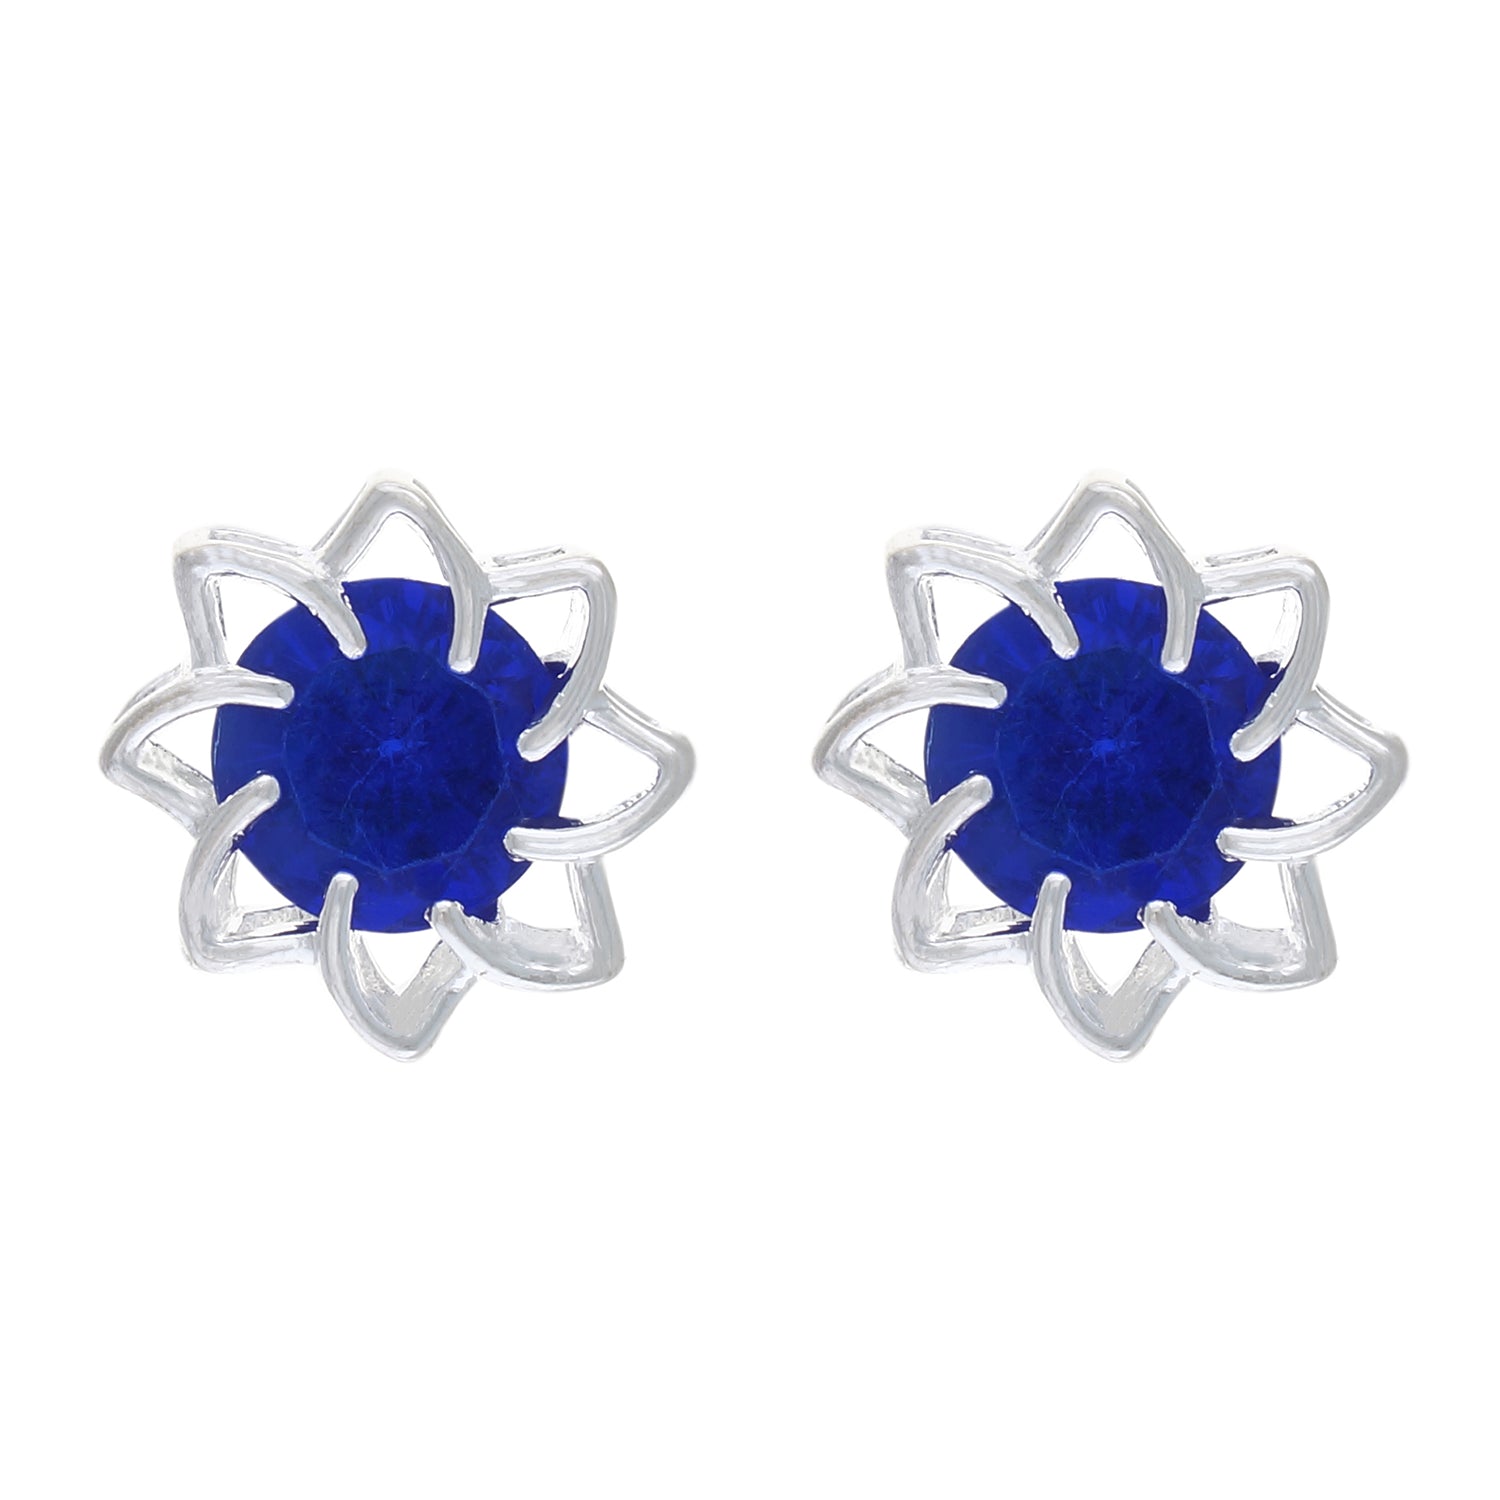 Blue colour Floral Design  Stud Earrings for Girls and Women